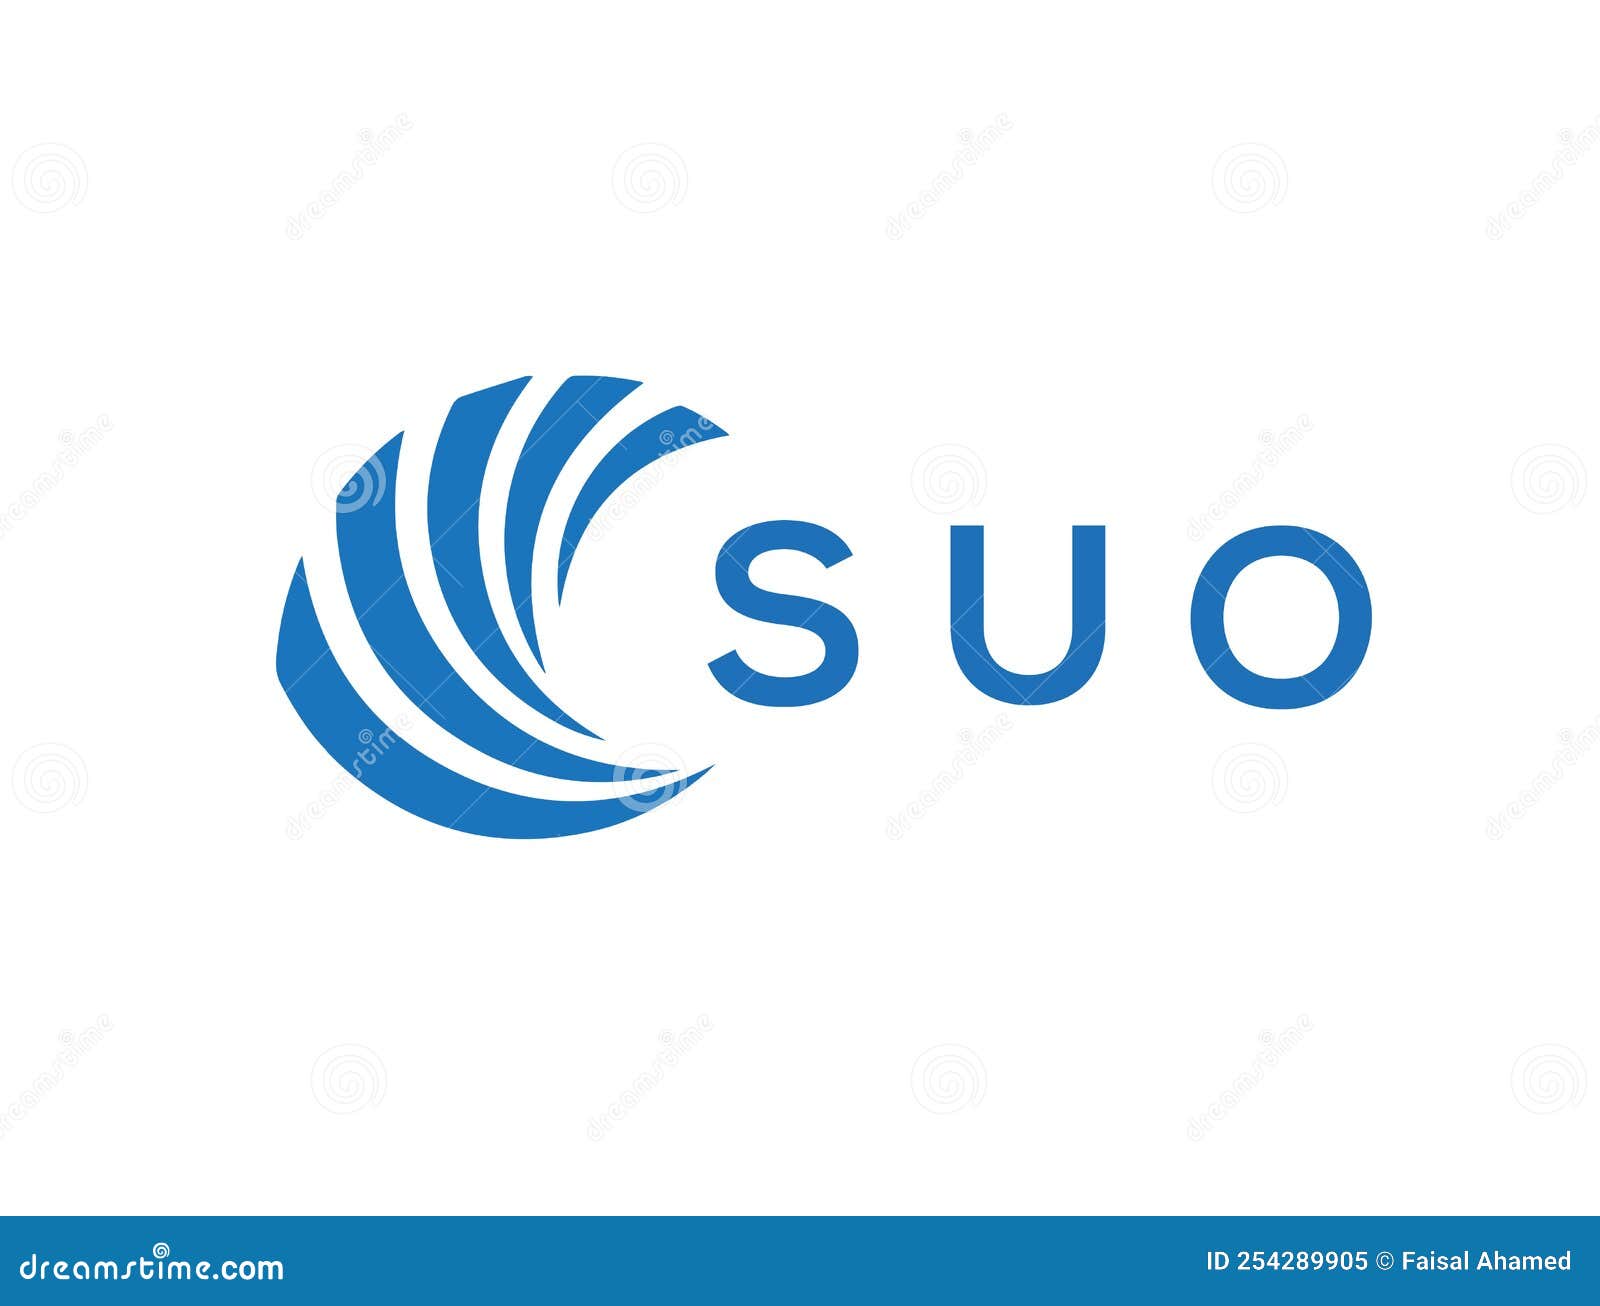 suo letter logo  on white background. suo creative circle letter logo concept